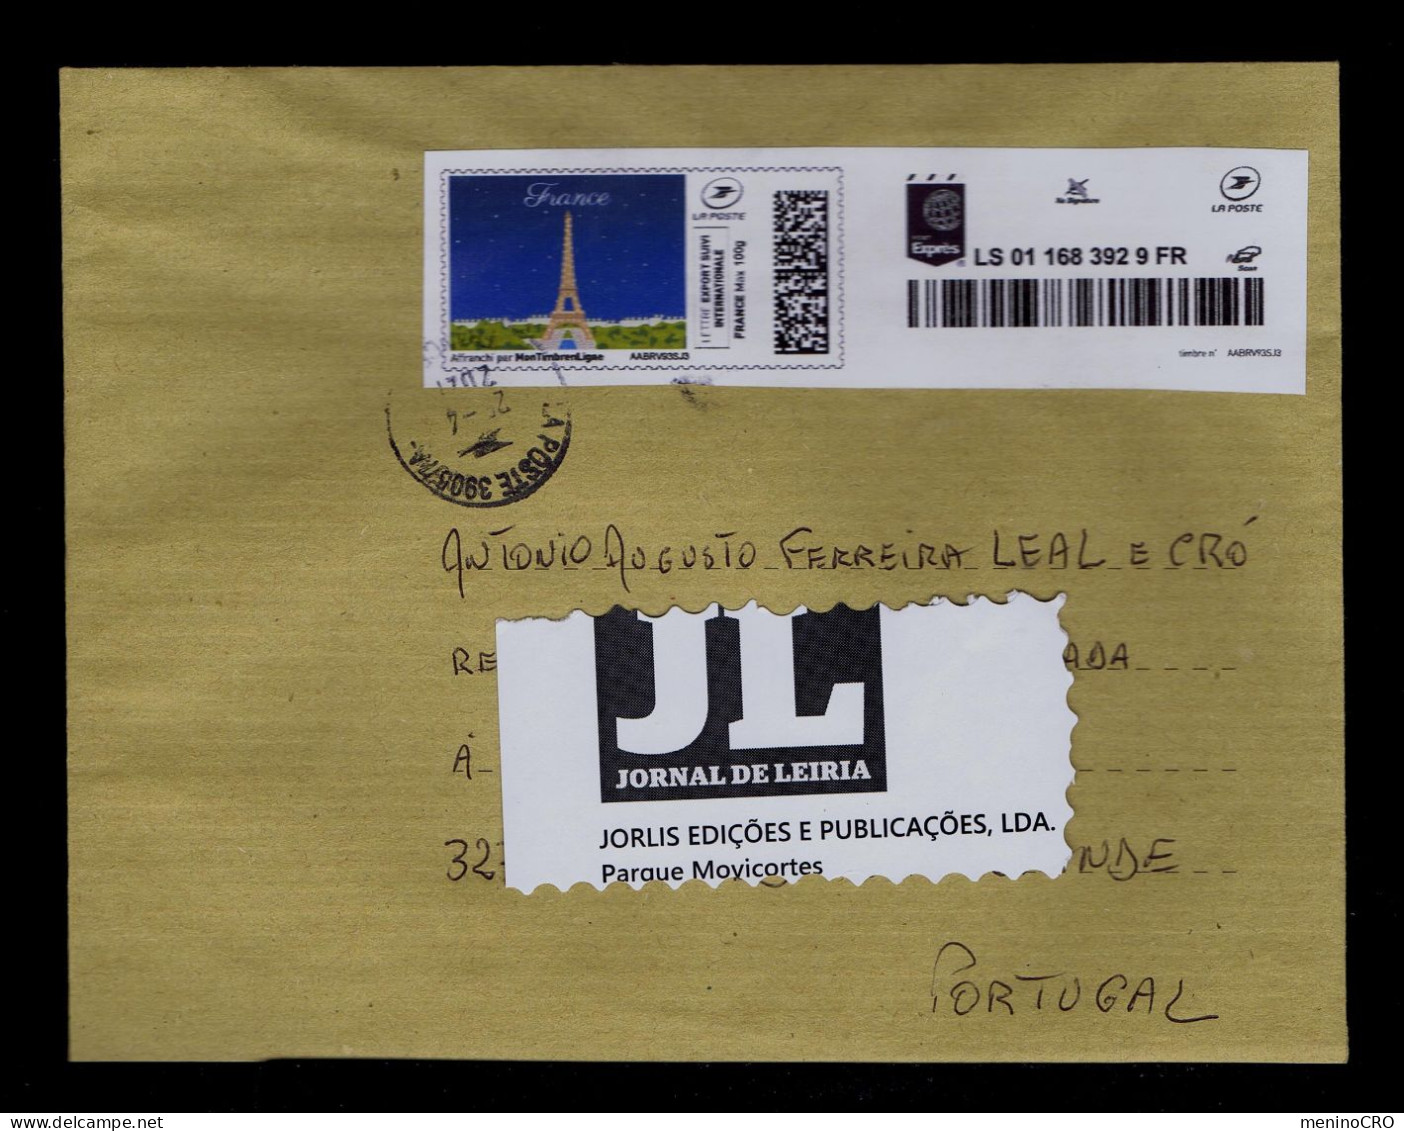 Gc8518 FRANCE "EIFFELL TOWER" Monuments  Post Label (MonTimbreLigne) Expres LA POSTE Mailed 2021 Portugal - Denkmäler